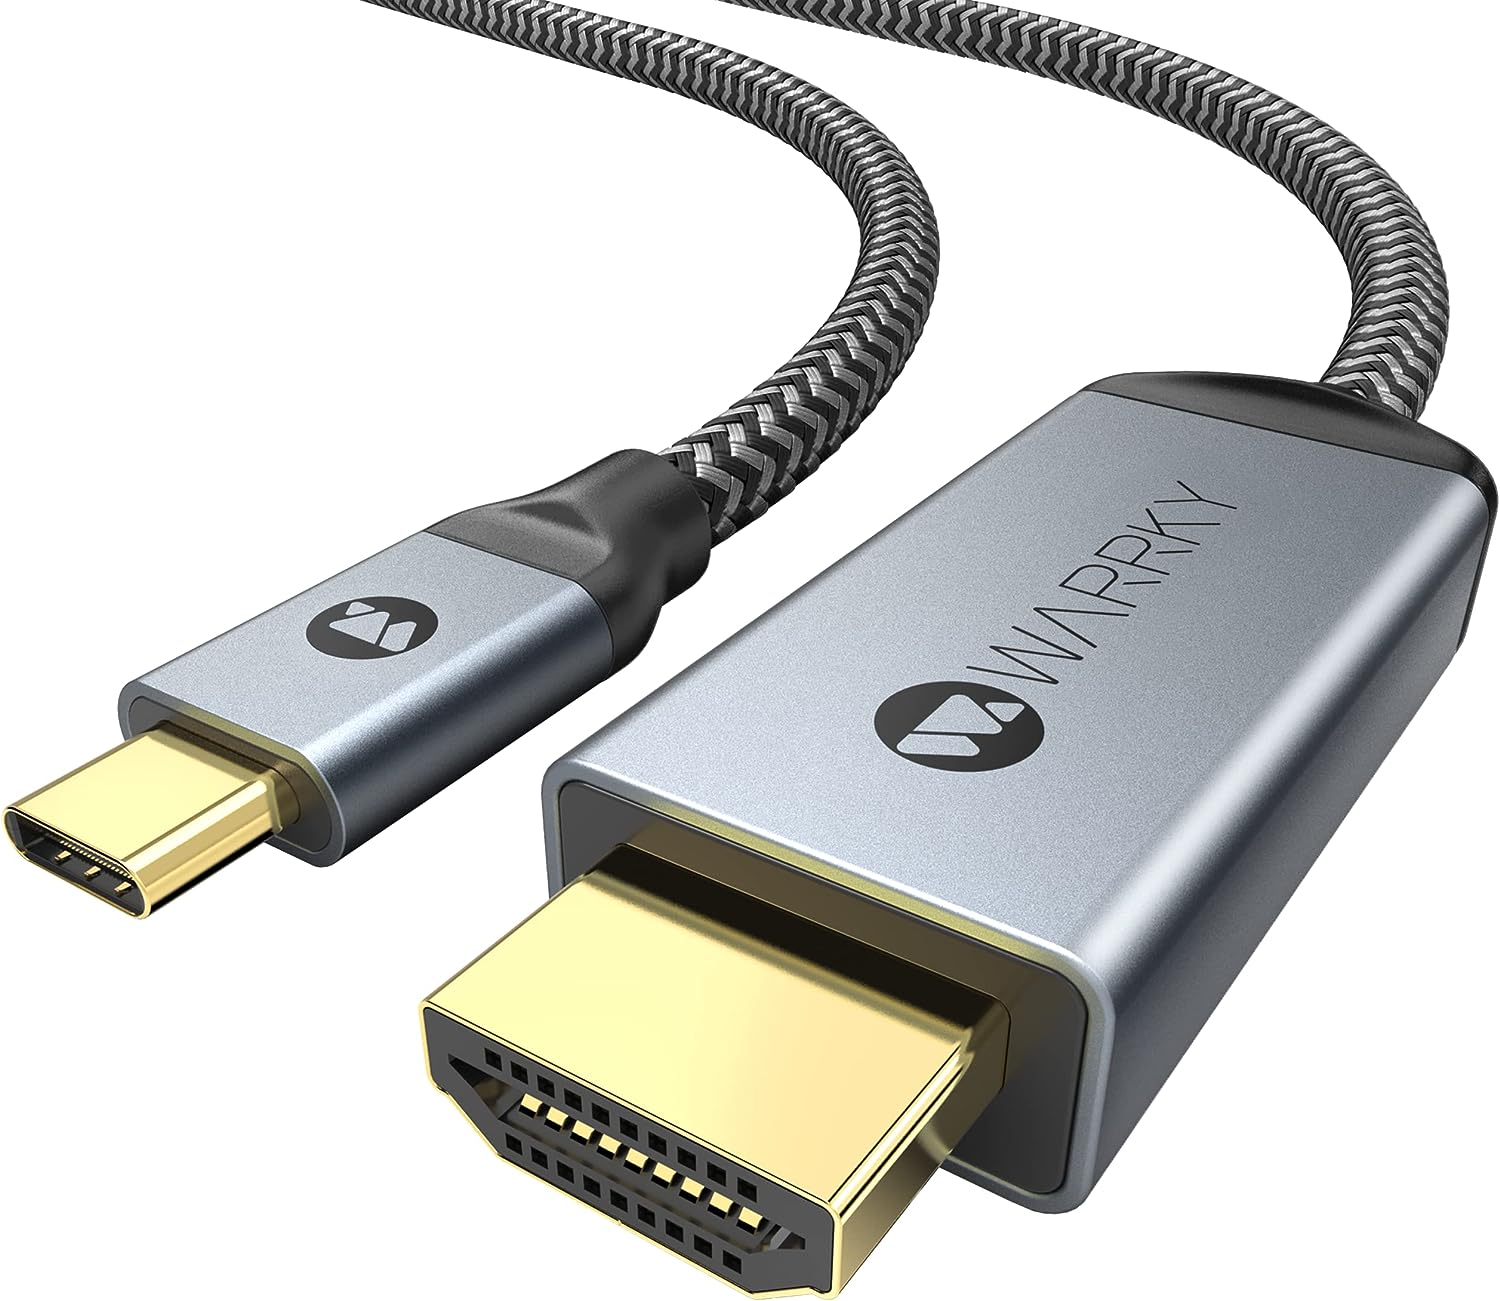 Warrky USB C to HDMI Cable 4K, 3.3ft [Braided, High [...]